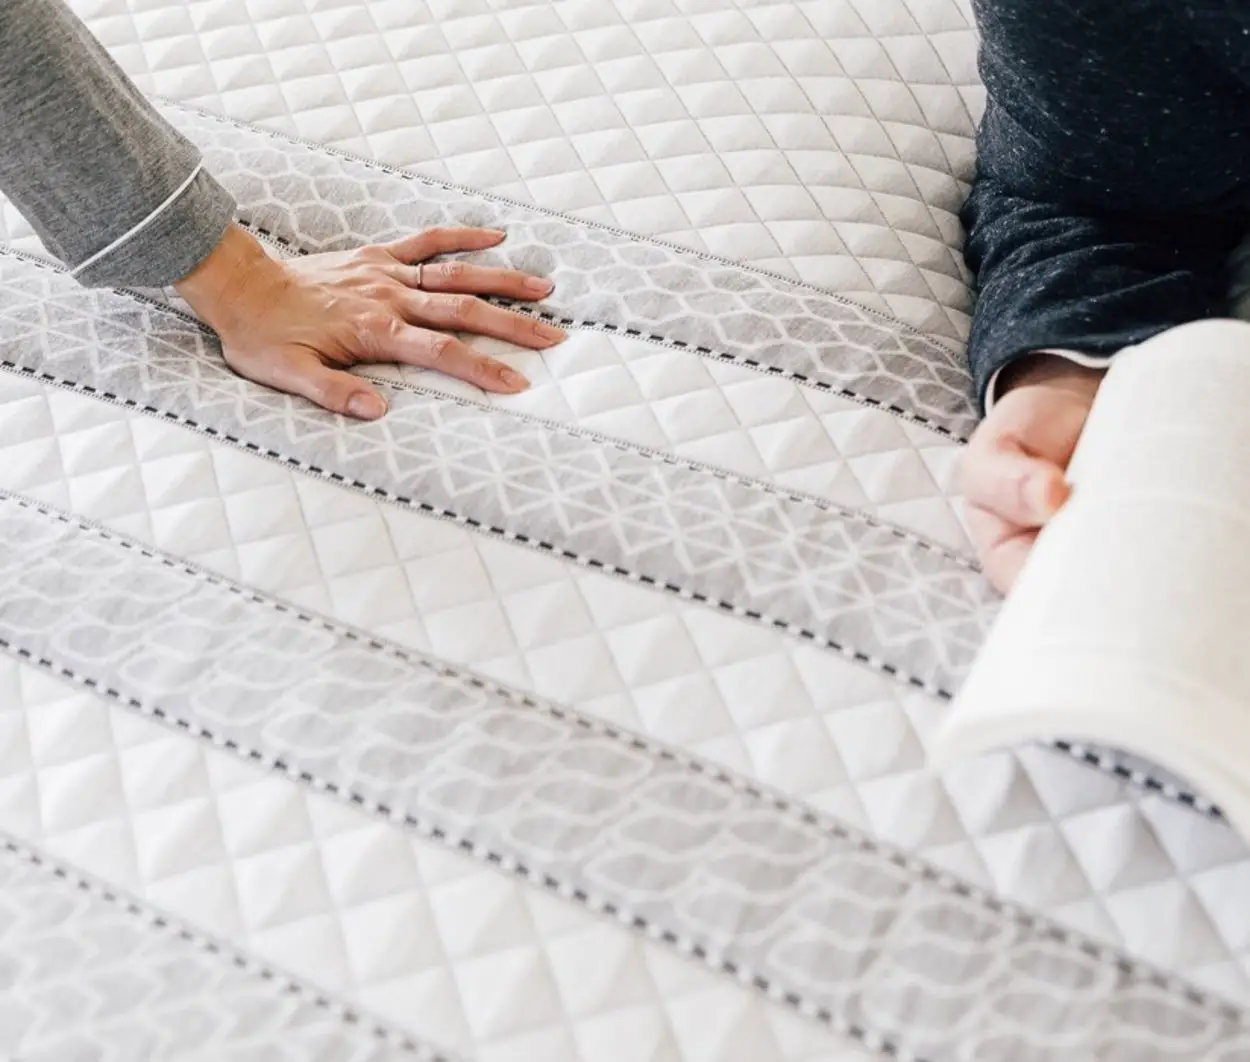 INTRODUCING THE BEST MATTRESSES FOR BACK PAIN IN 2020 · DailySneakPeek.com